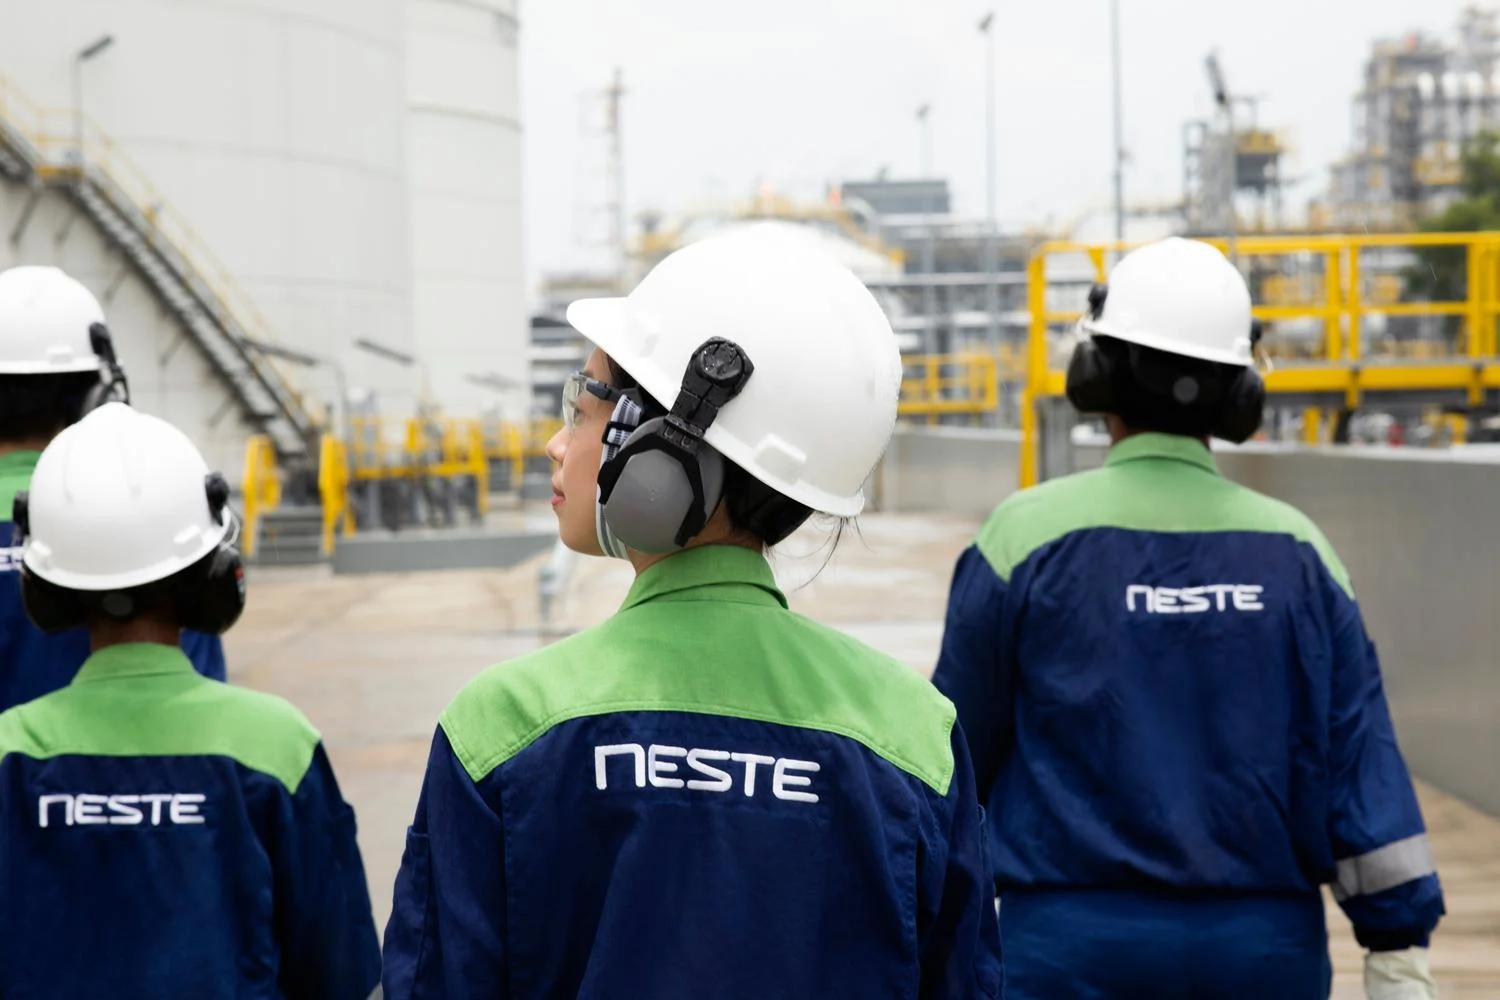 Neste personnel working at the Singapore refinery.